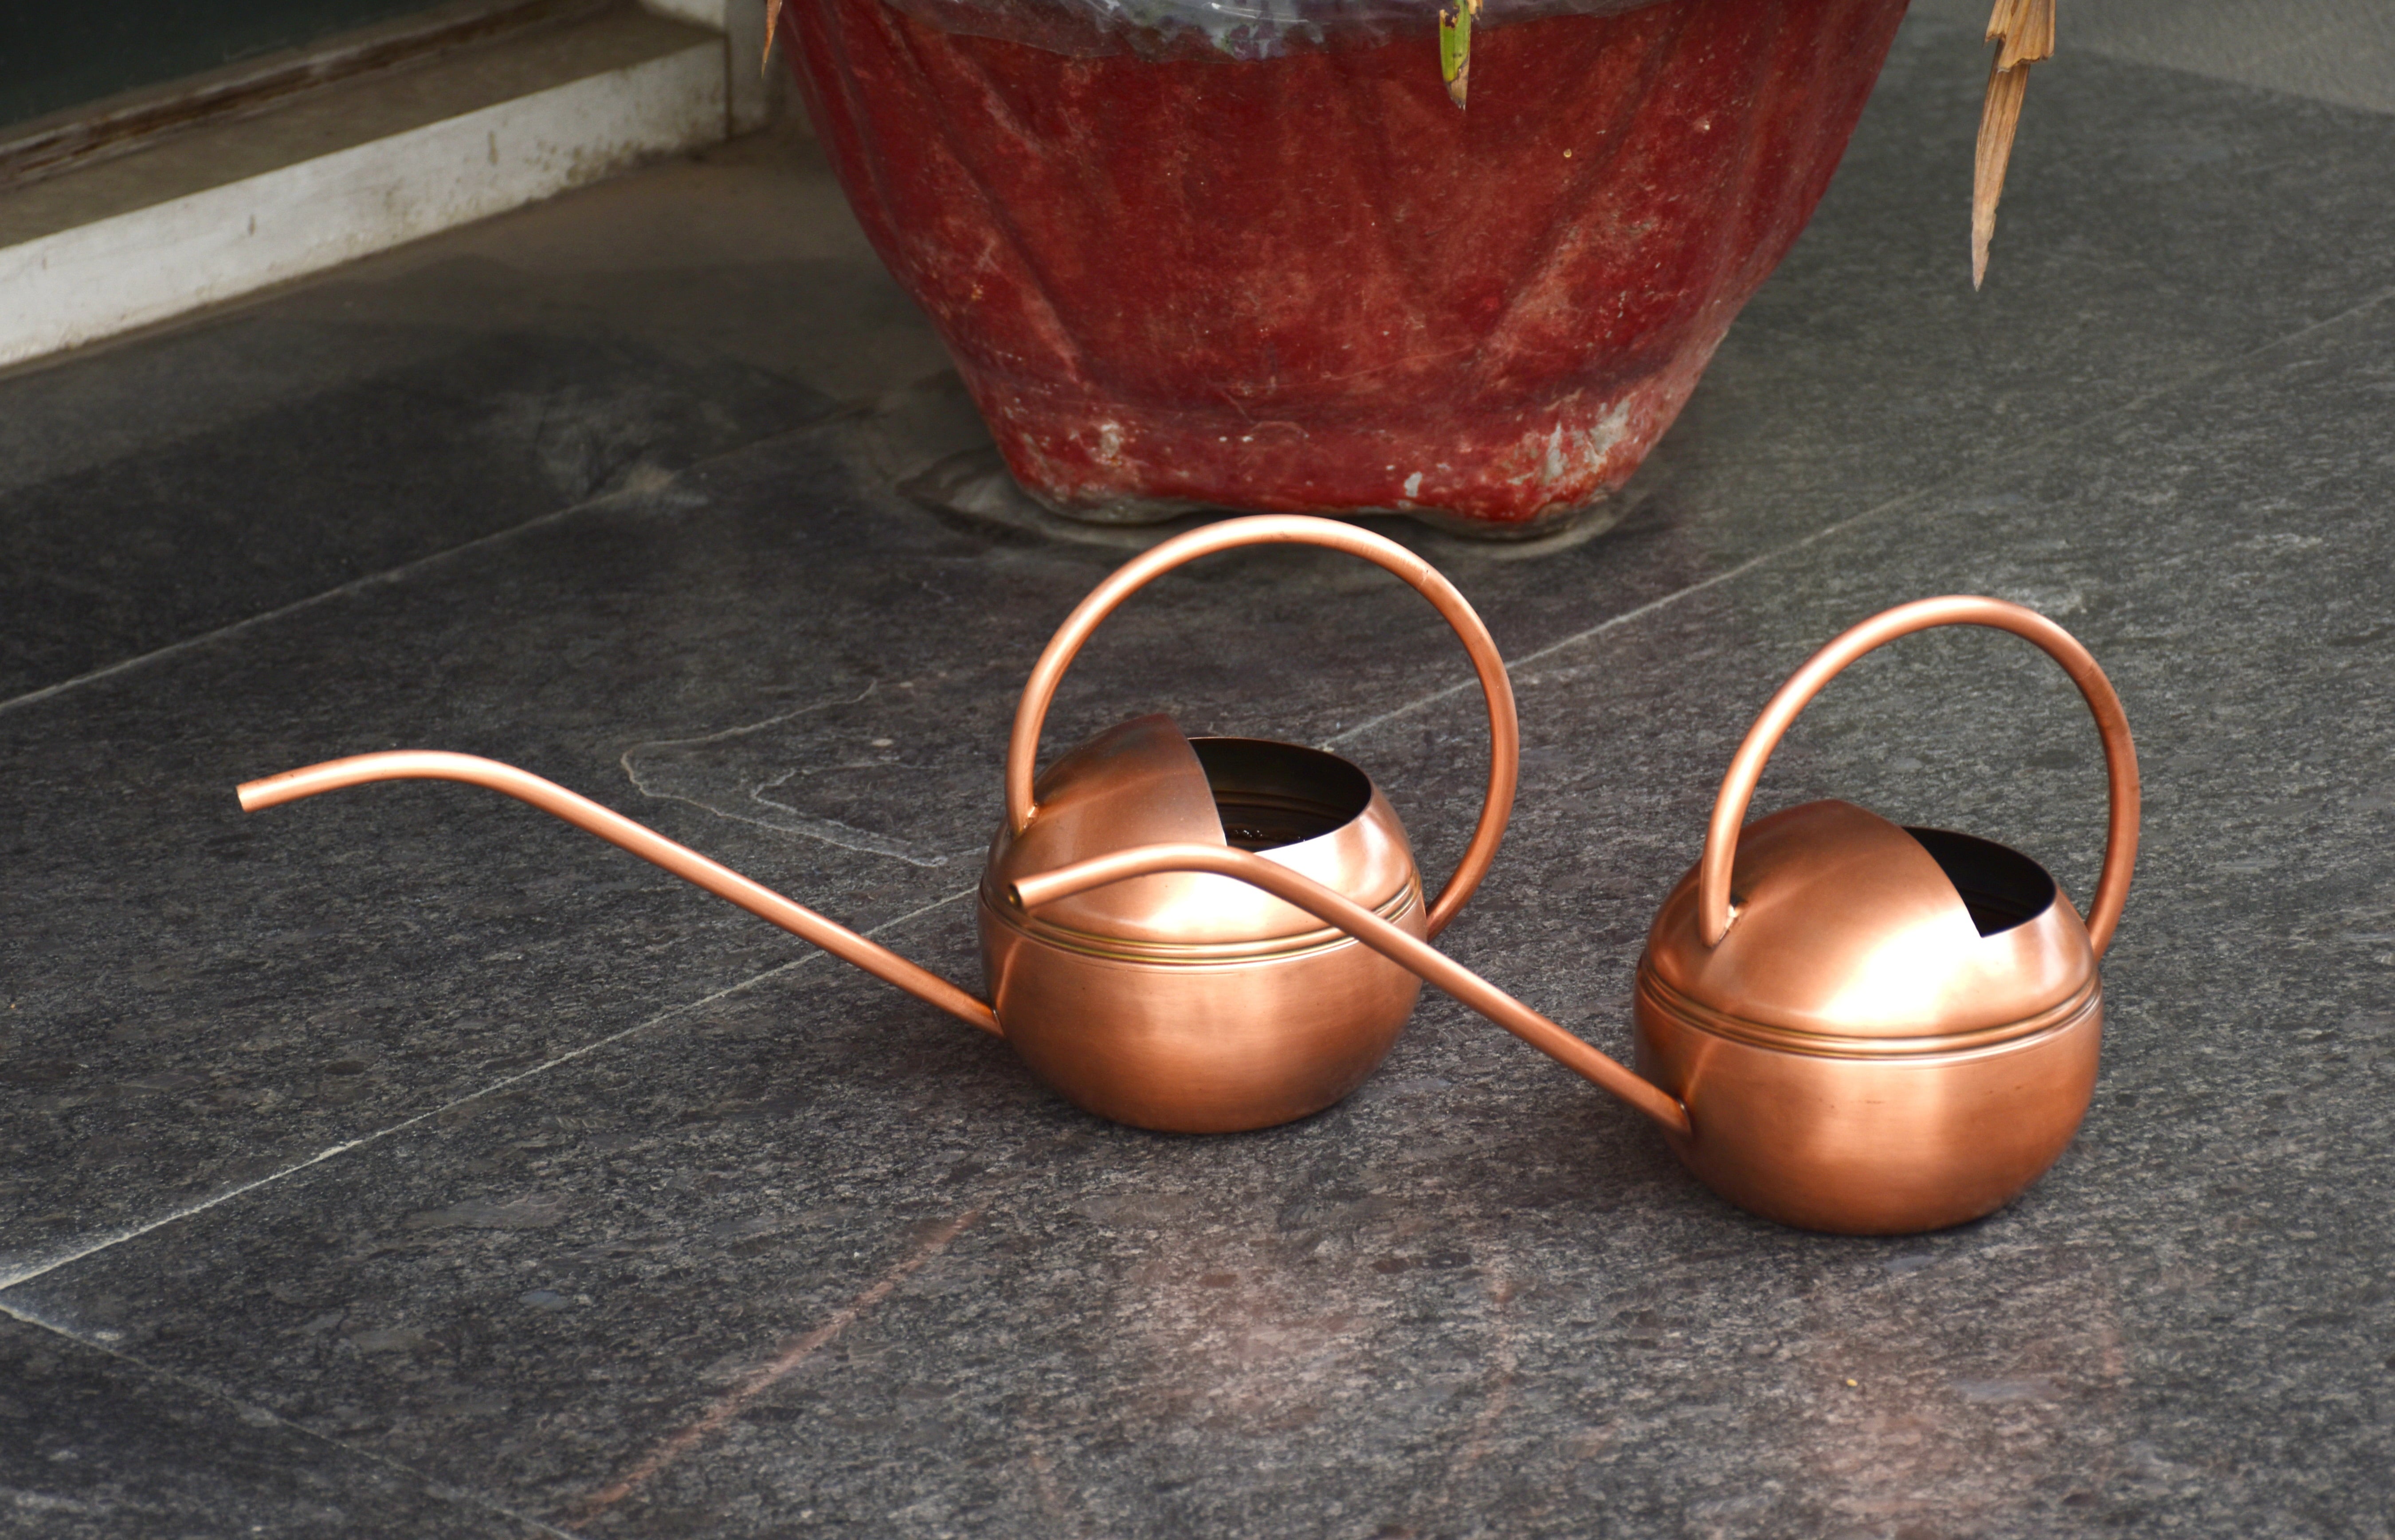 Better Homes & Gardens 2 Count Metal Watering Cans Copper finish, 7.25 inch